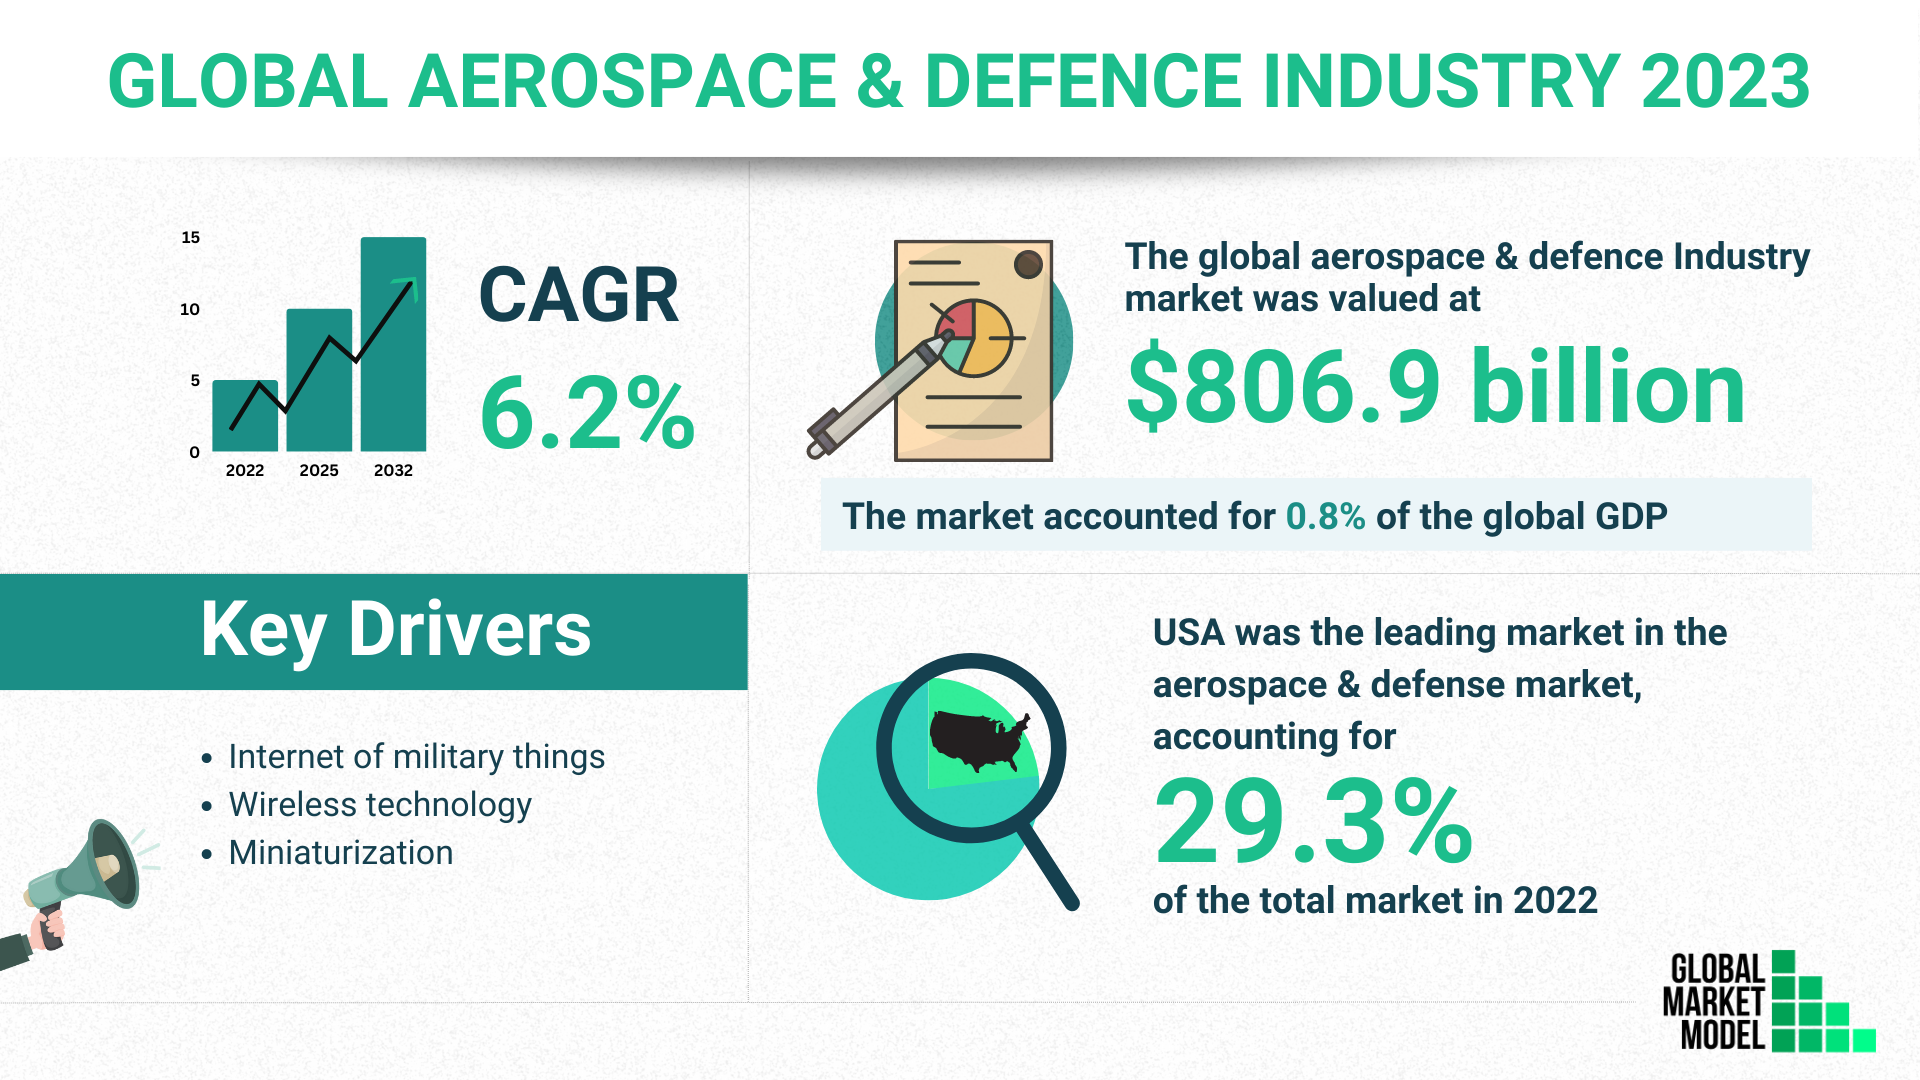 Global Aerospace And Defence Industry 2023